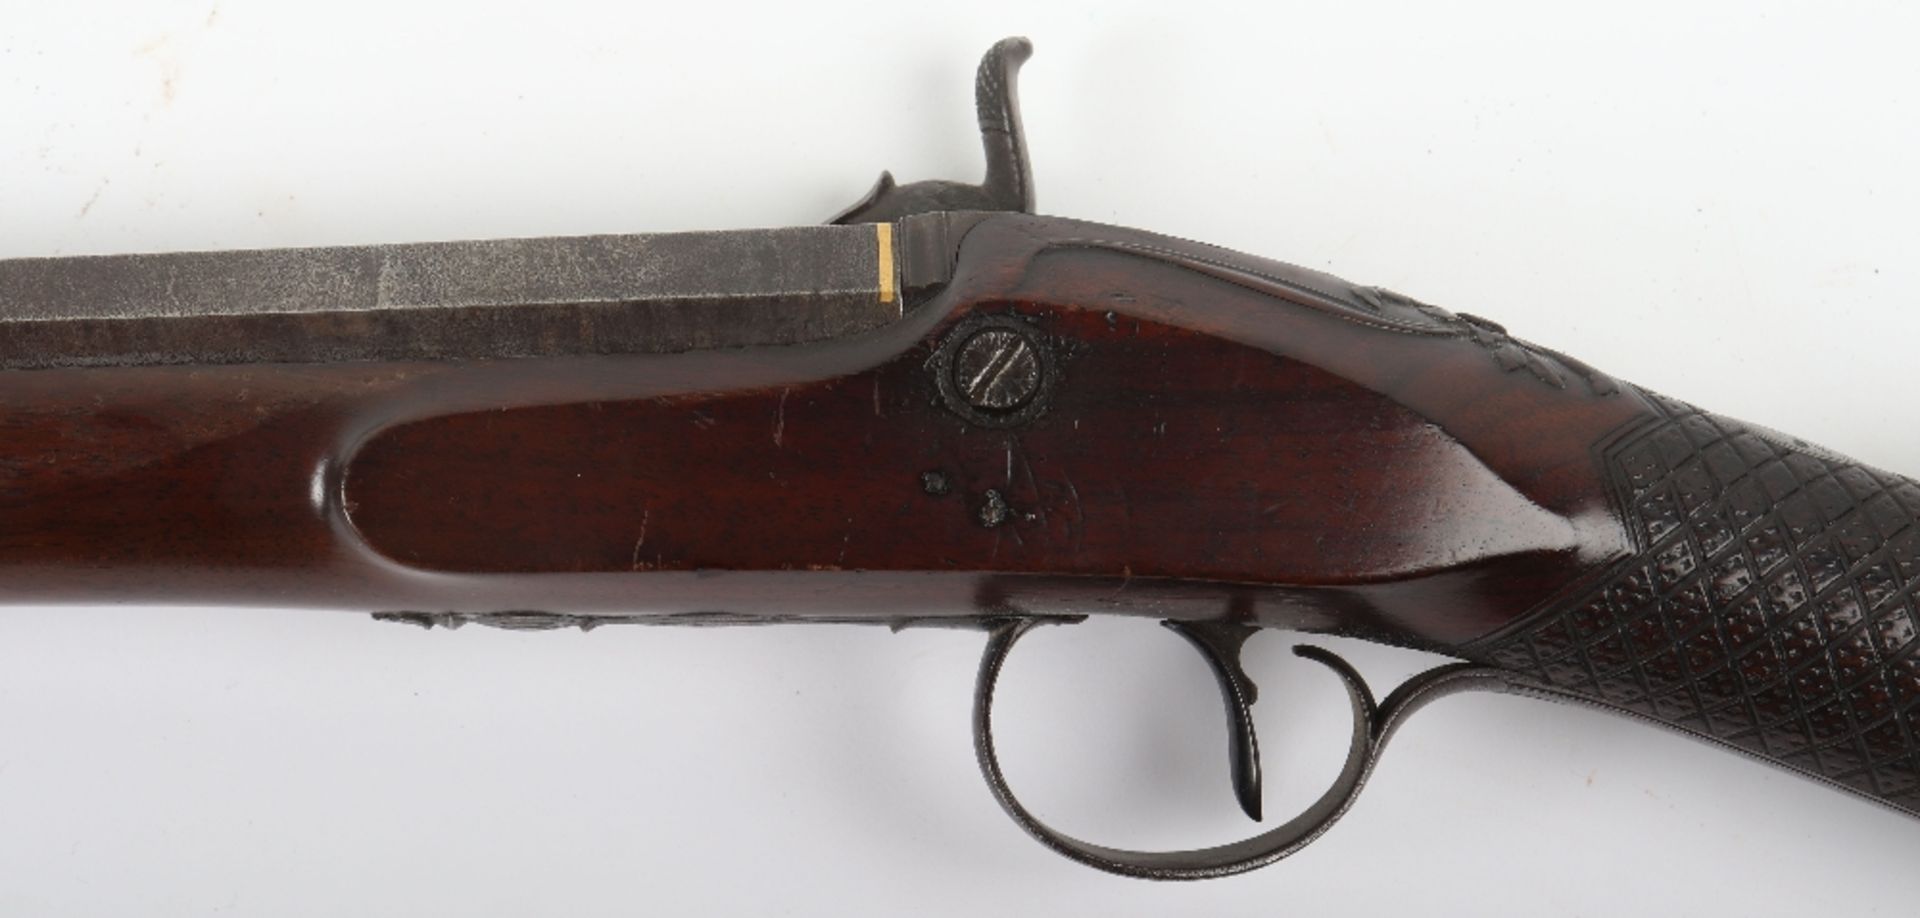 16-Bore Percussion Sporting Gun by D. Egg, Late 18th Century - Image 14 of 15